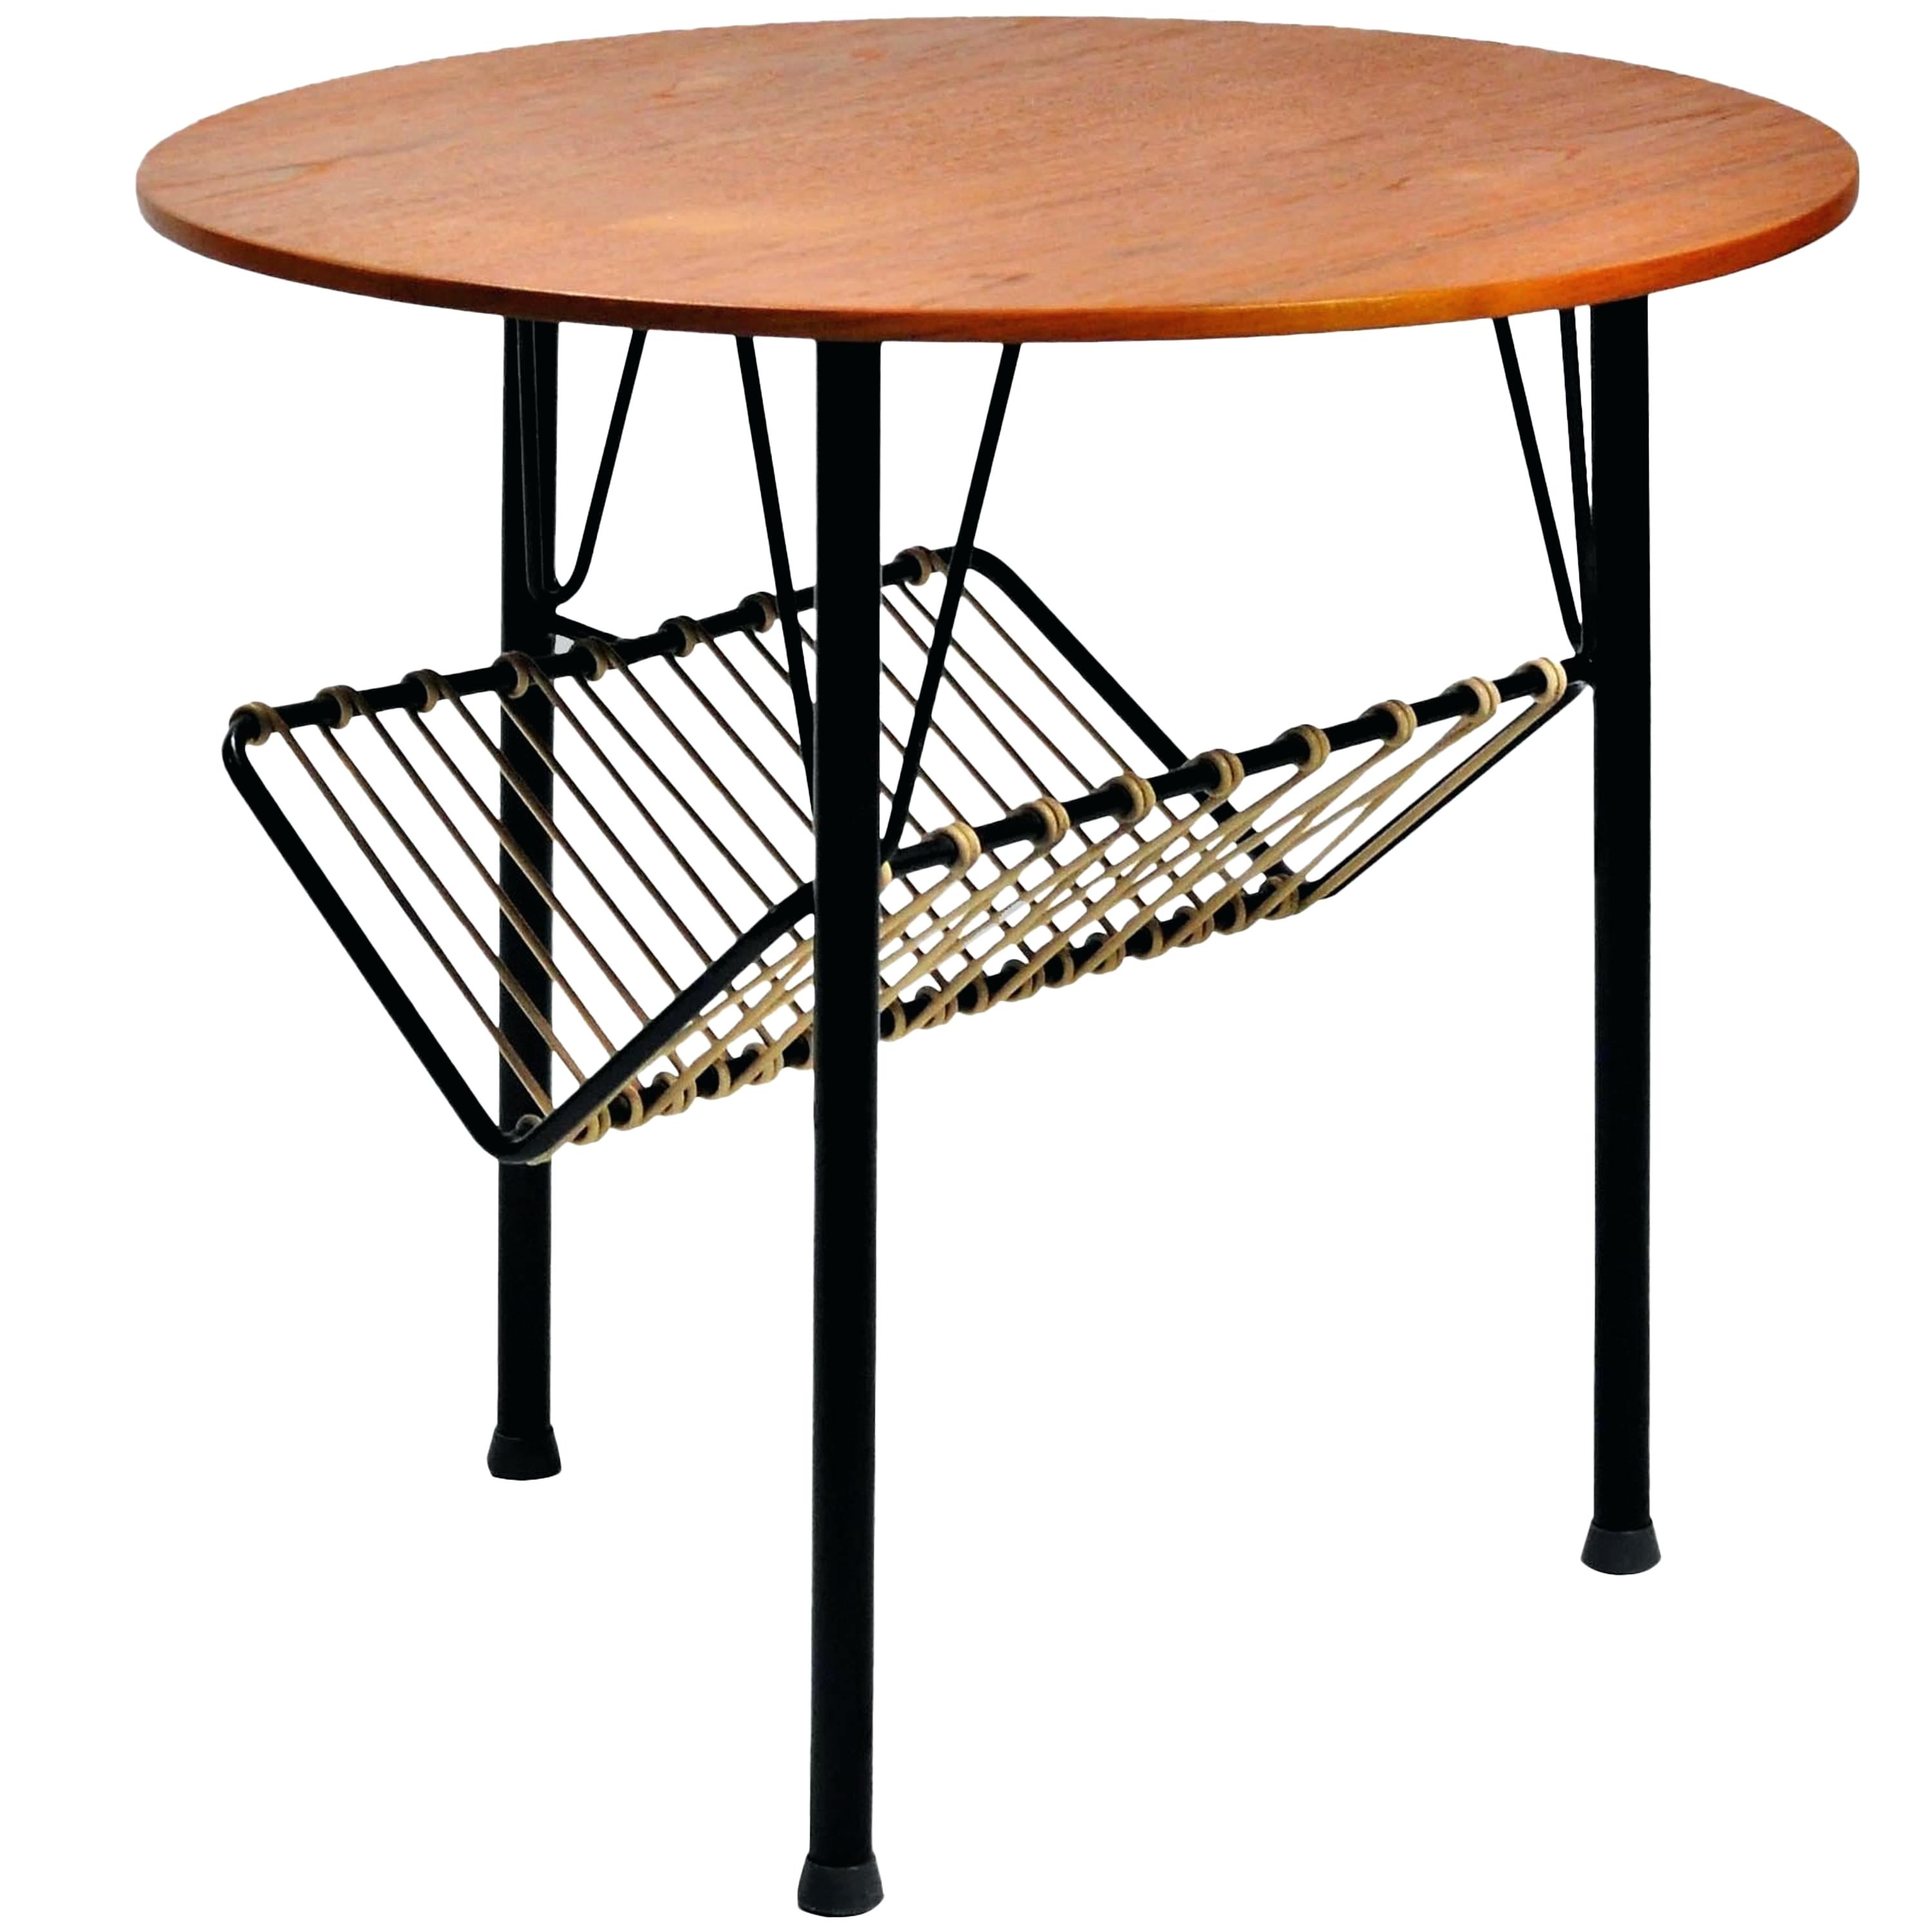 black metal side table outdoor cage coffee danish teak and small round accent drawer pulls knobs ethan allen chippendale dining chairs the range bedside lamps chalk paint diy desk